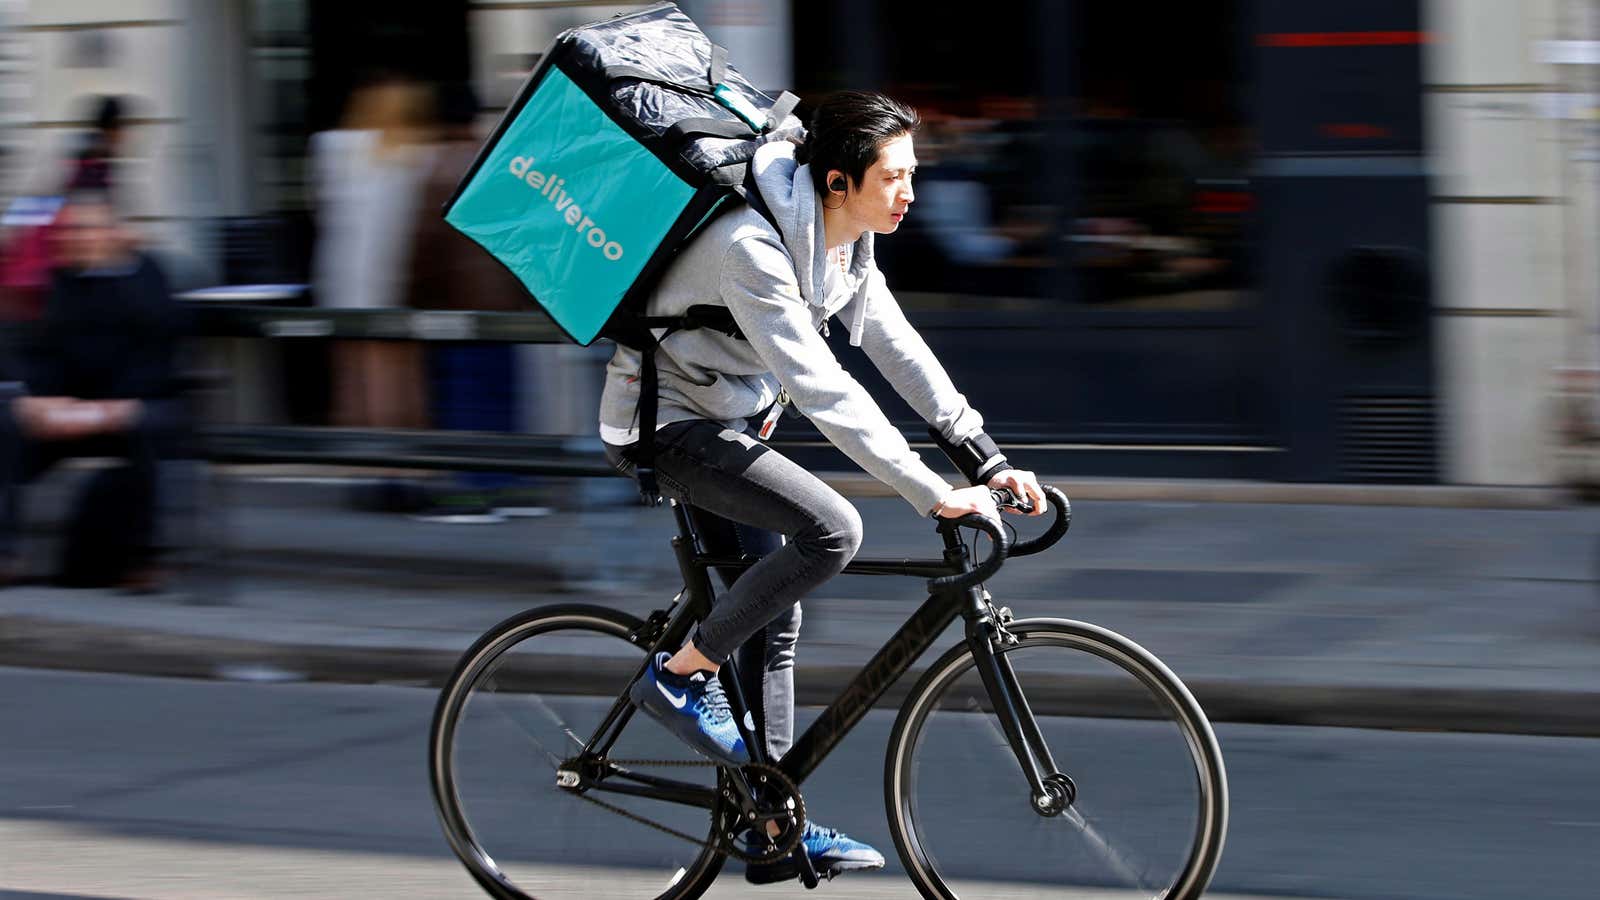 Gig economy apps like Uber, Deliveroo, and Handy classify their workers are independent contractors, not employees.